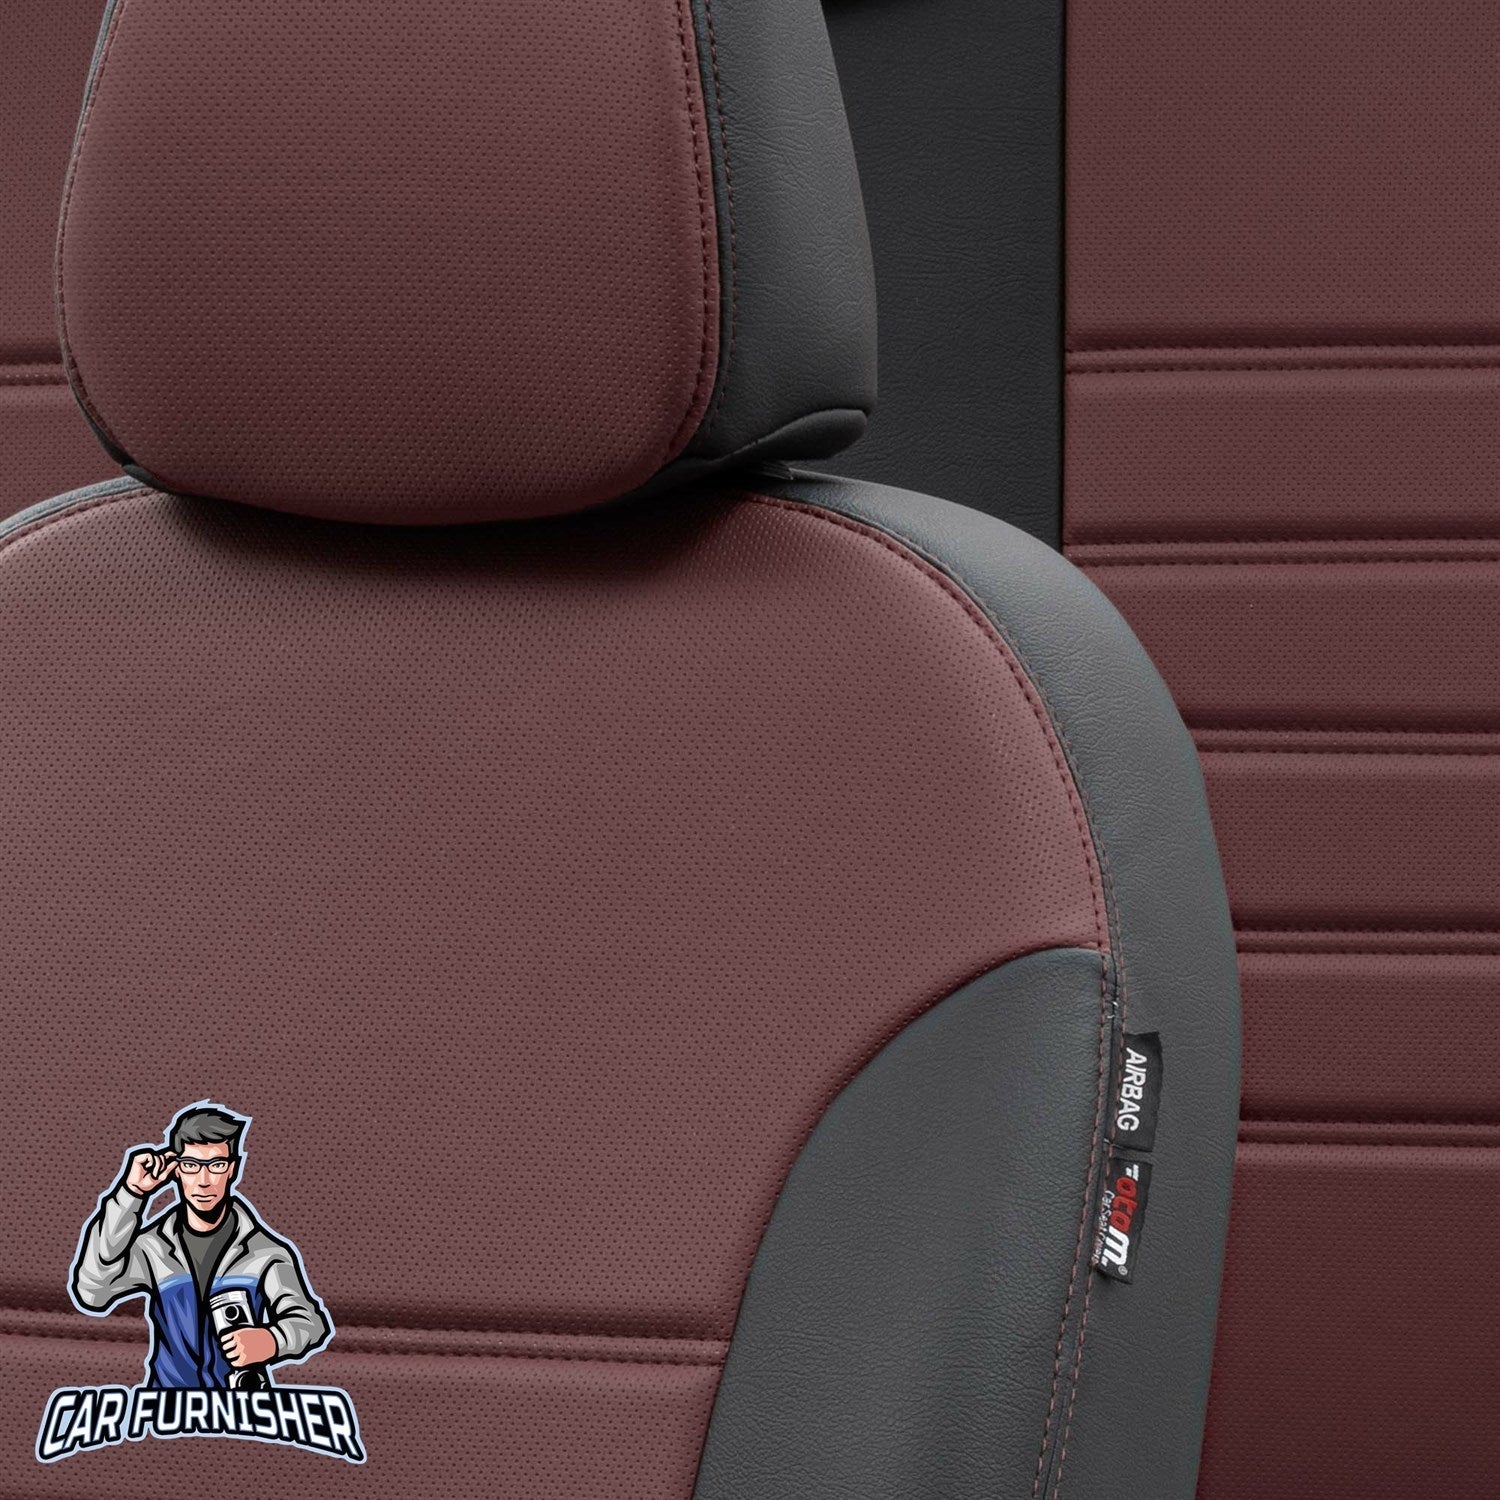 Citroen C5 Seat Covers Istanbul Leather Design Burgundy Leather